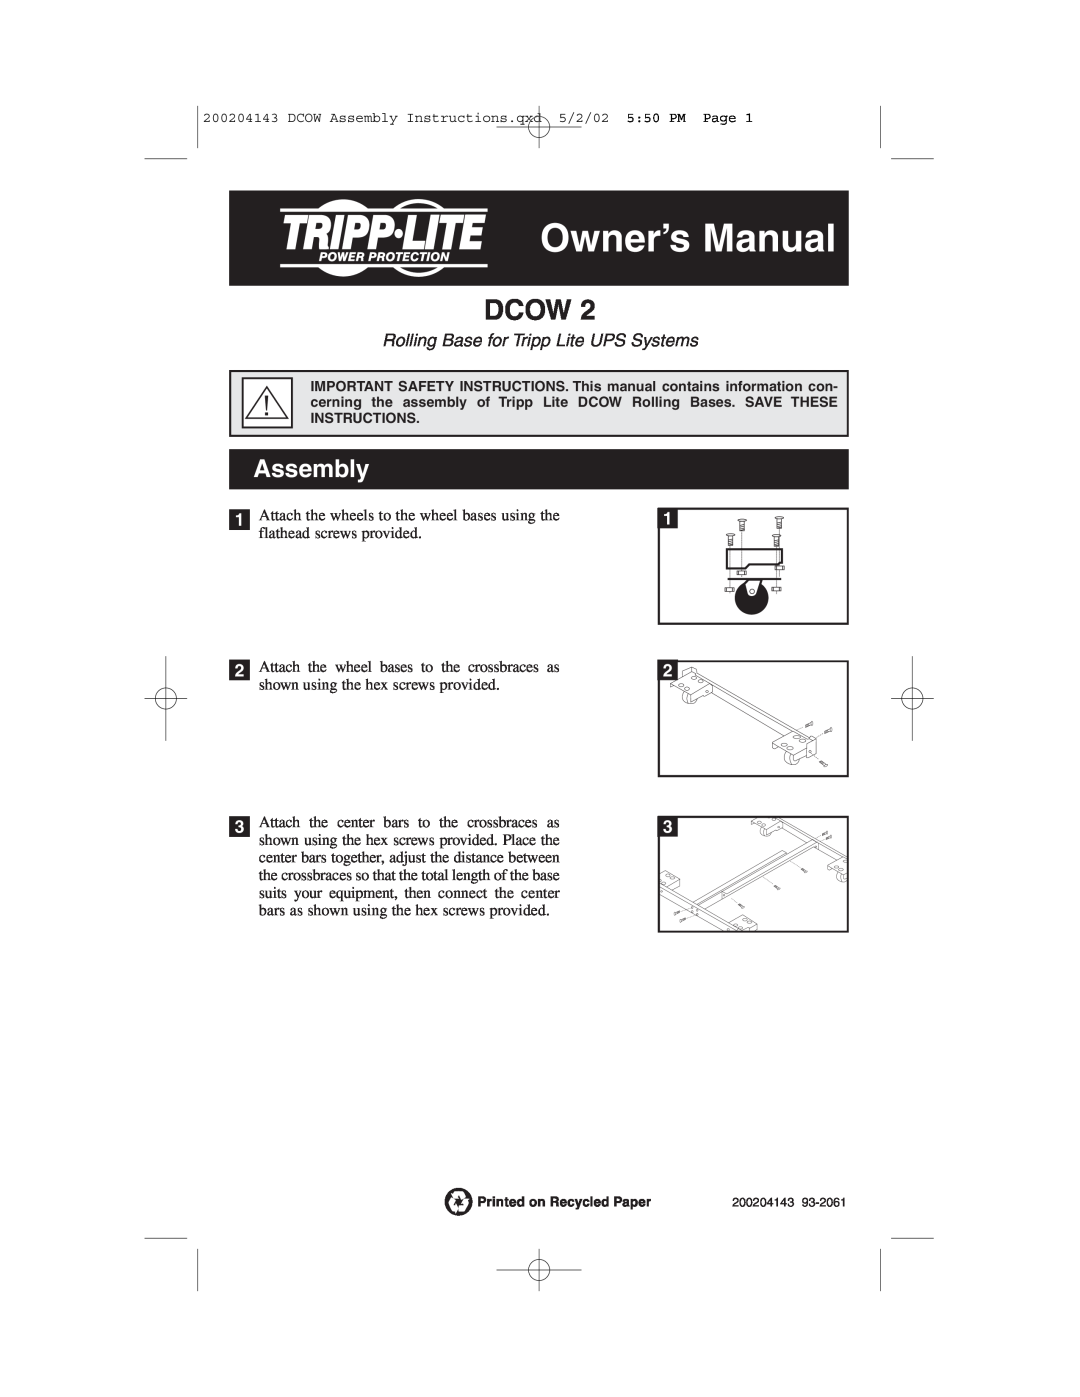 Tripp Lite DCOW 2 owner manual Owner’s Manual, Dcow, Assembly, Rolling Base for Tripp Lite UPS Systems 